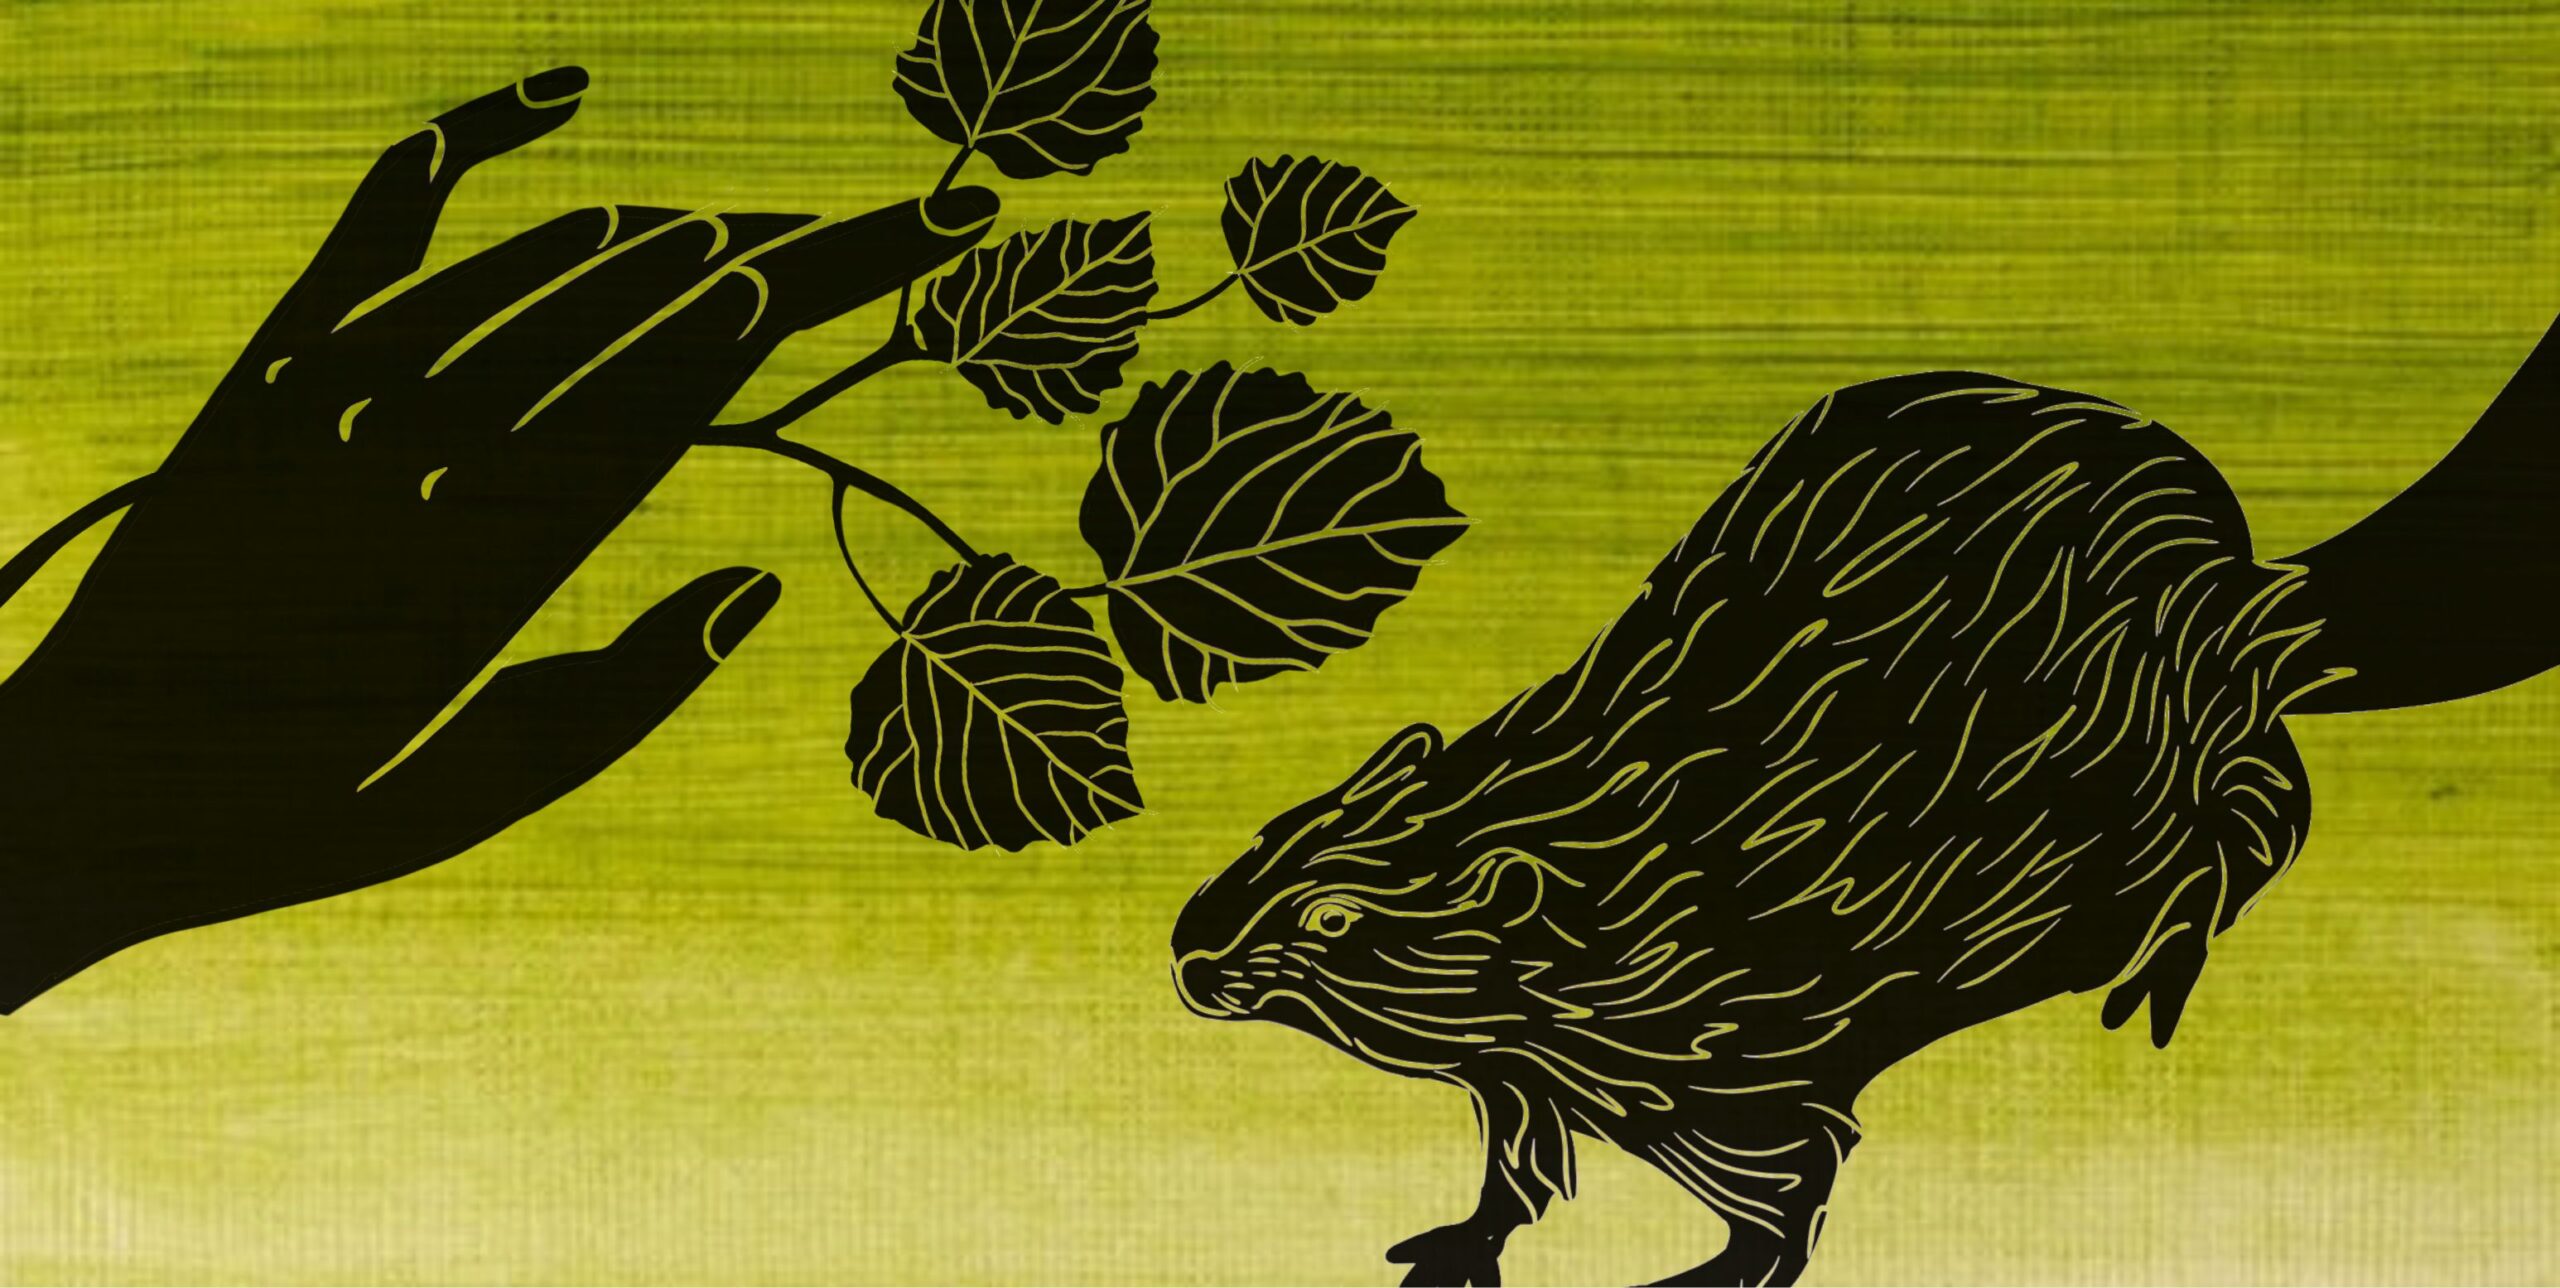 Illustration of a hand holding leaves and a small animal approaching the leaves. The background is green.